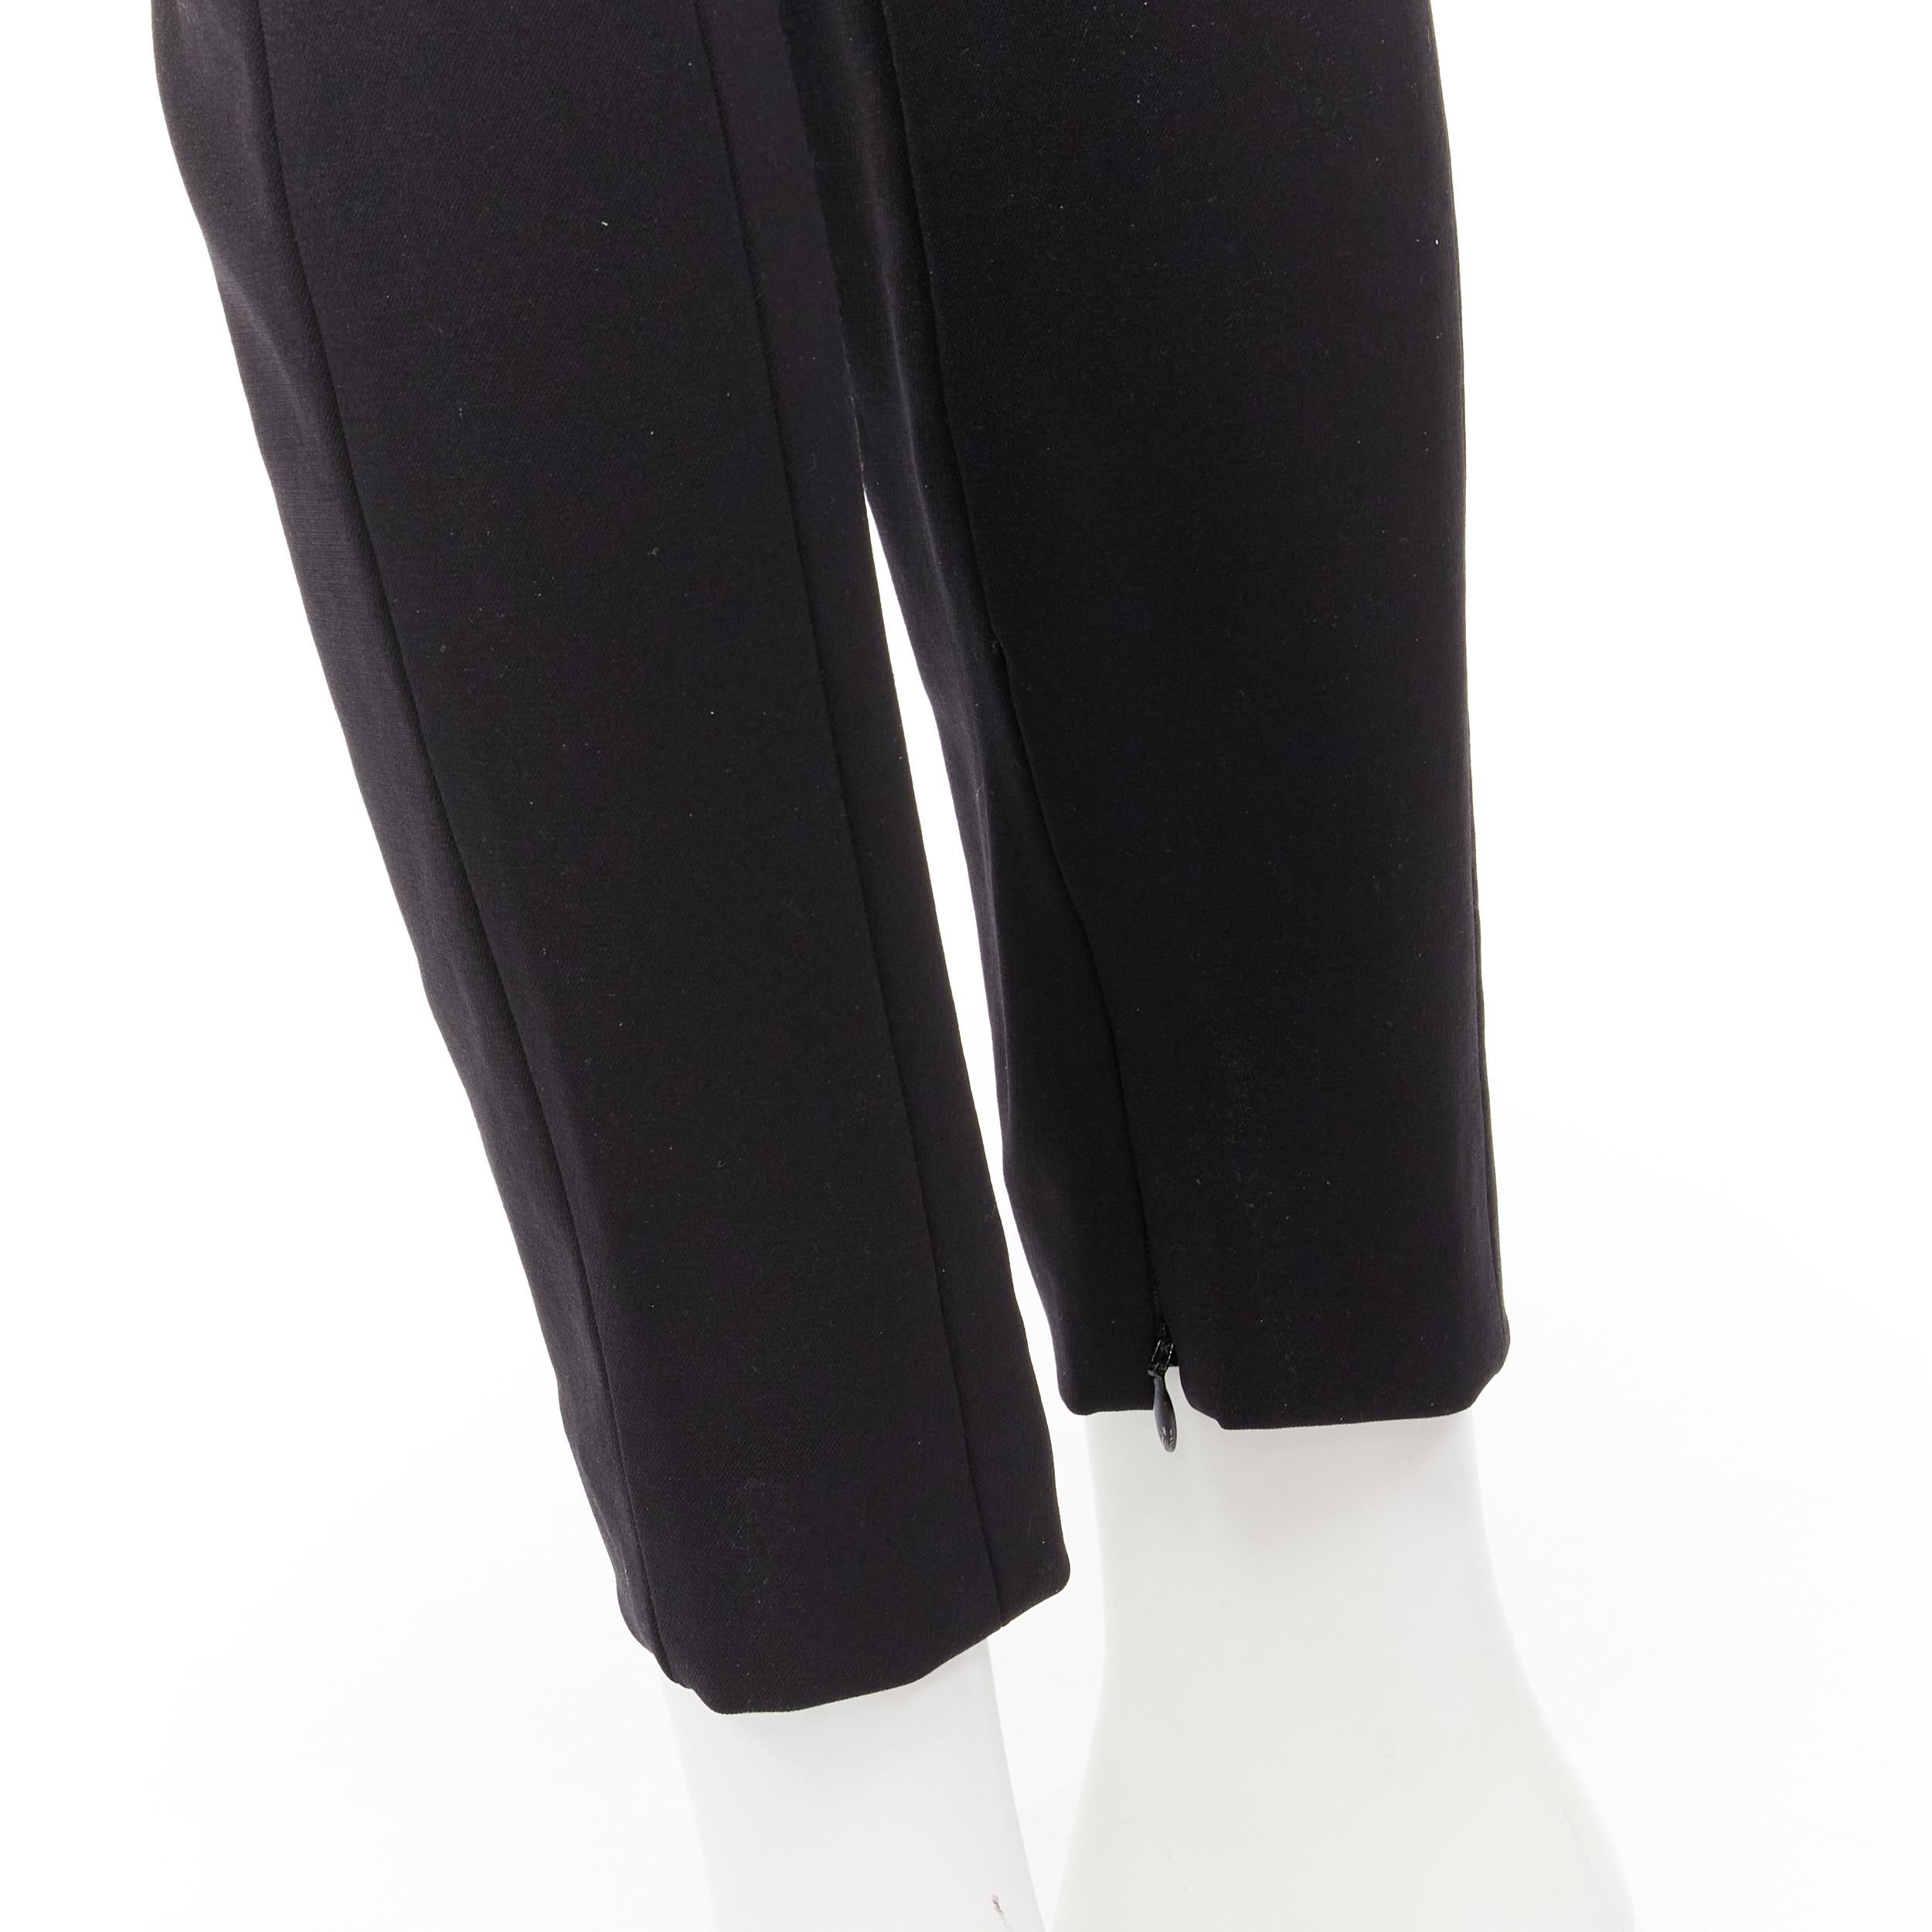 VICTORIA BEKHAM black stiff structured heavy fabric skinny pants UK10 M 
Reference: KEDG/A00103 
Brand: Victoria Beckham 
Material: Nylon 
Color: Black 
Pattern: Solid 
Closure: Zip 
Extra Detail: 4-pocket. Zipped at hem. 
Made in: Italy